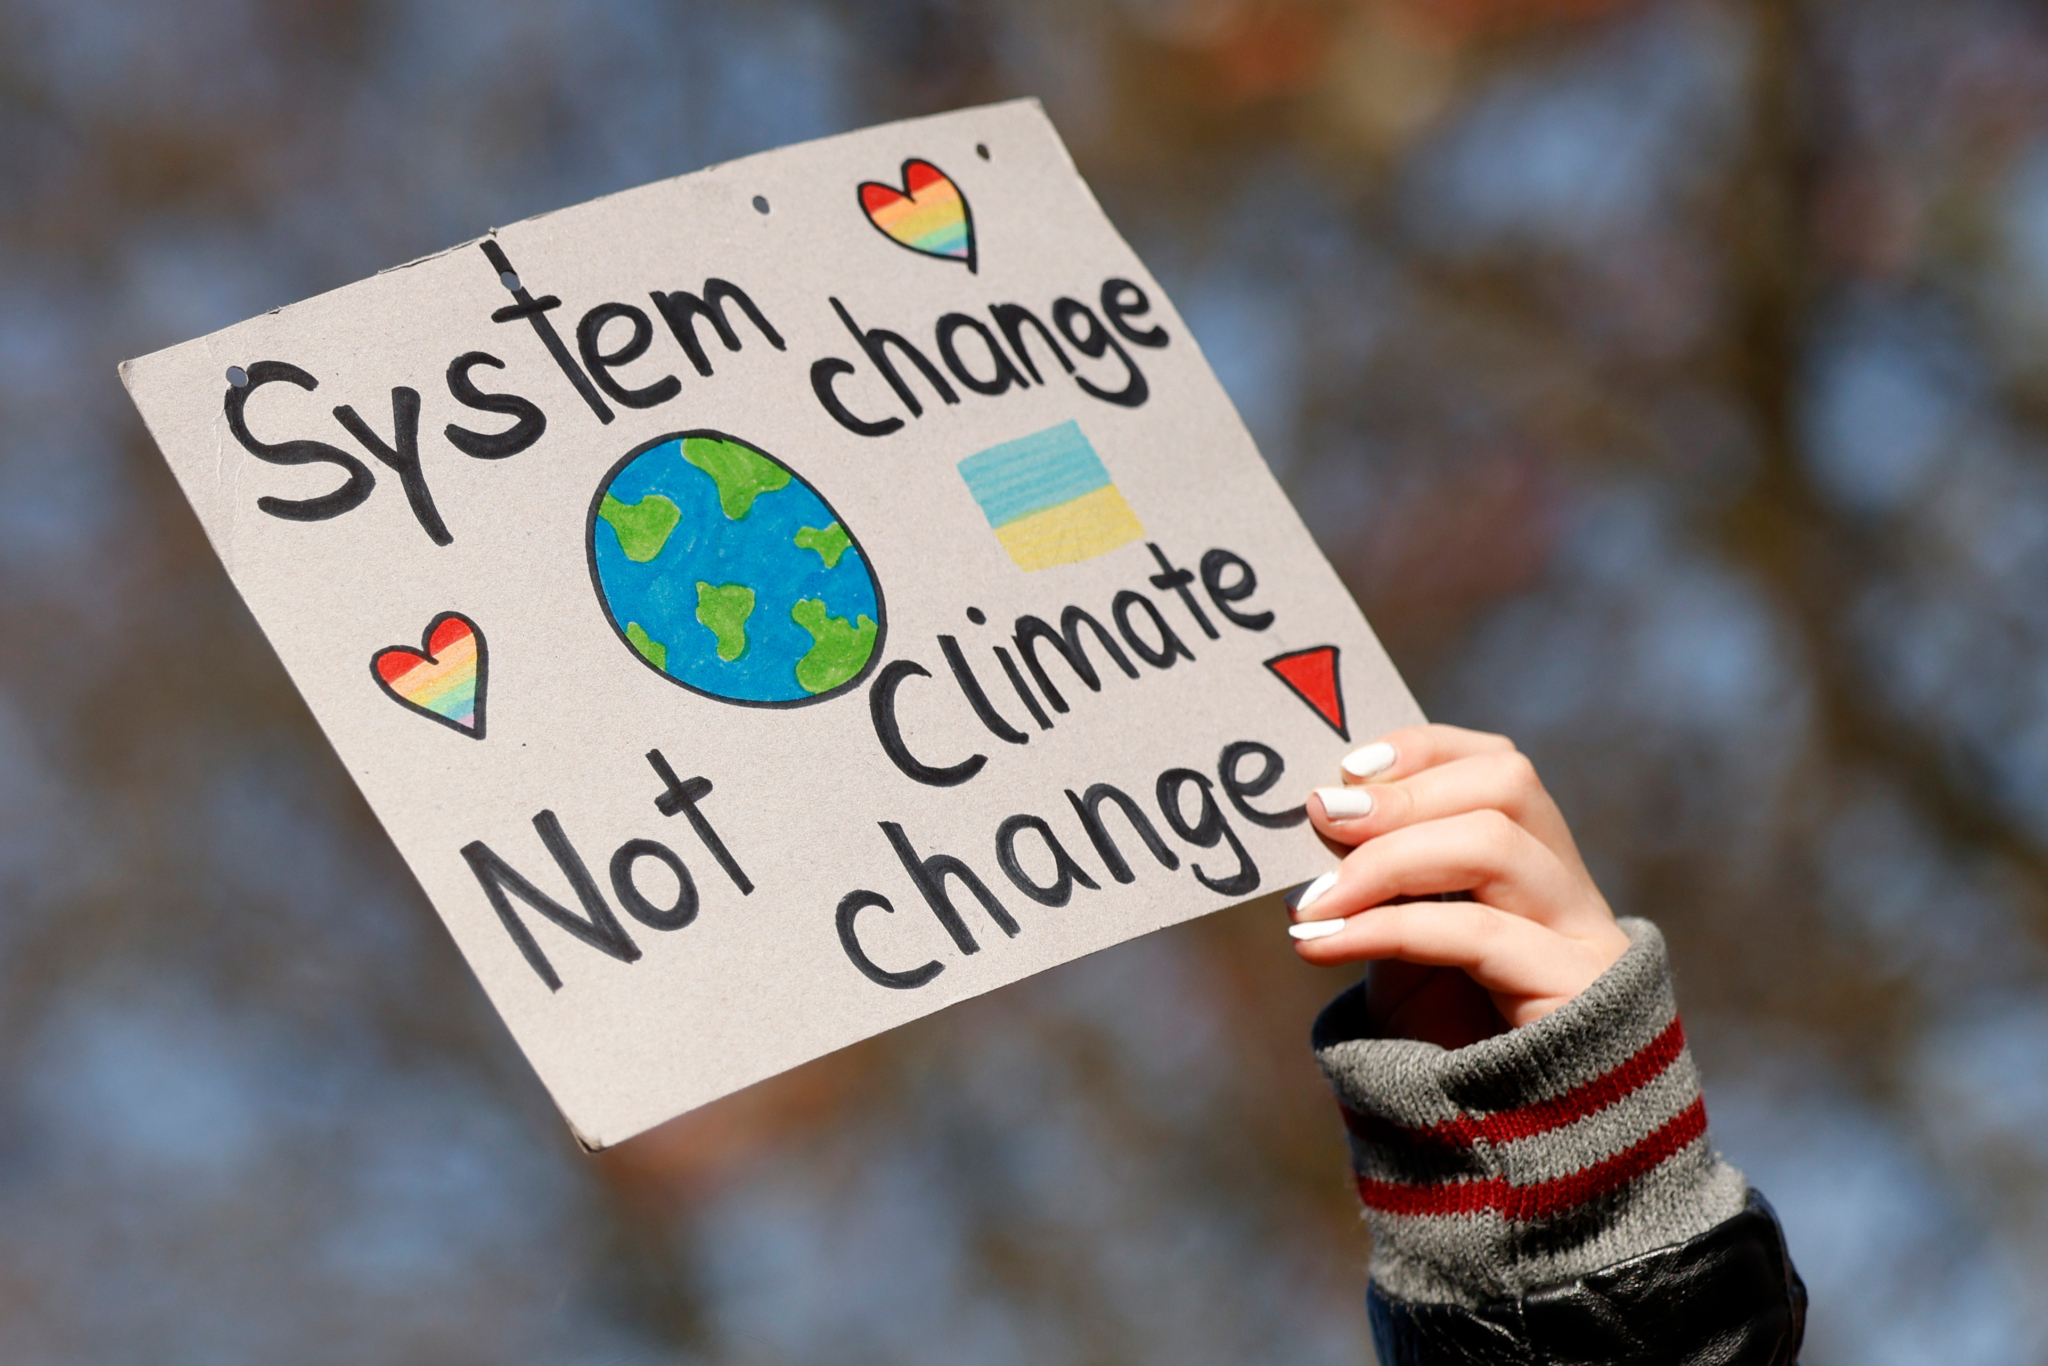 A sign held high has an image of Planet Earth surrounded by hearts and says: "System change. Not climate change"